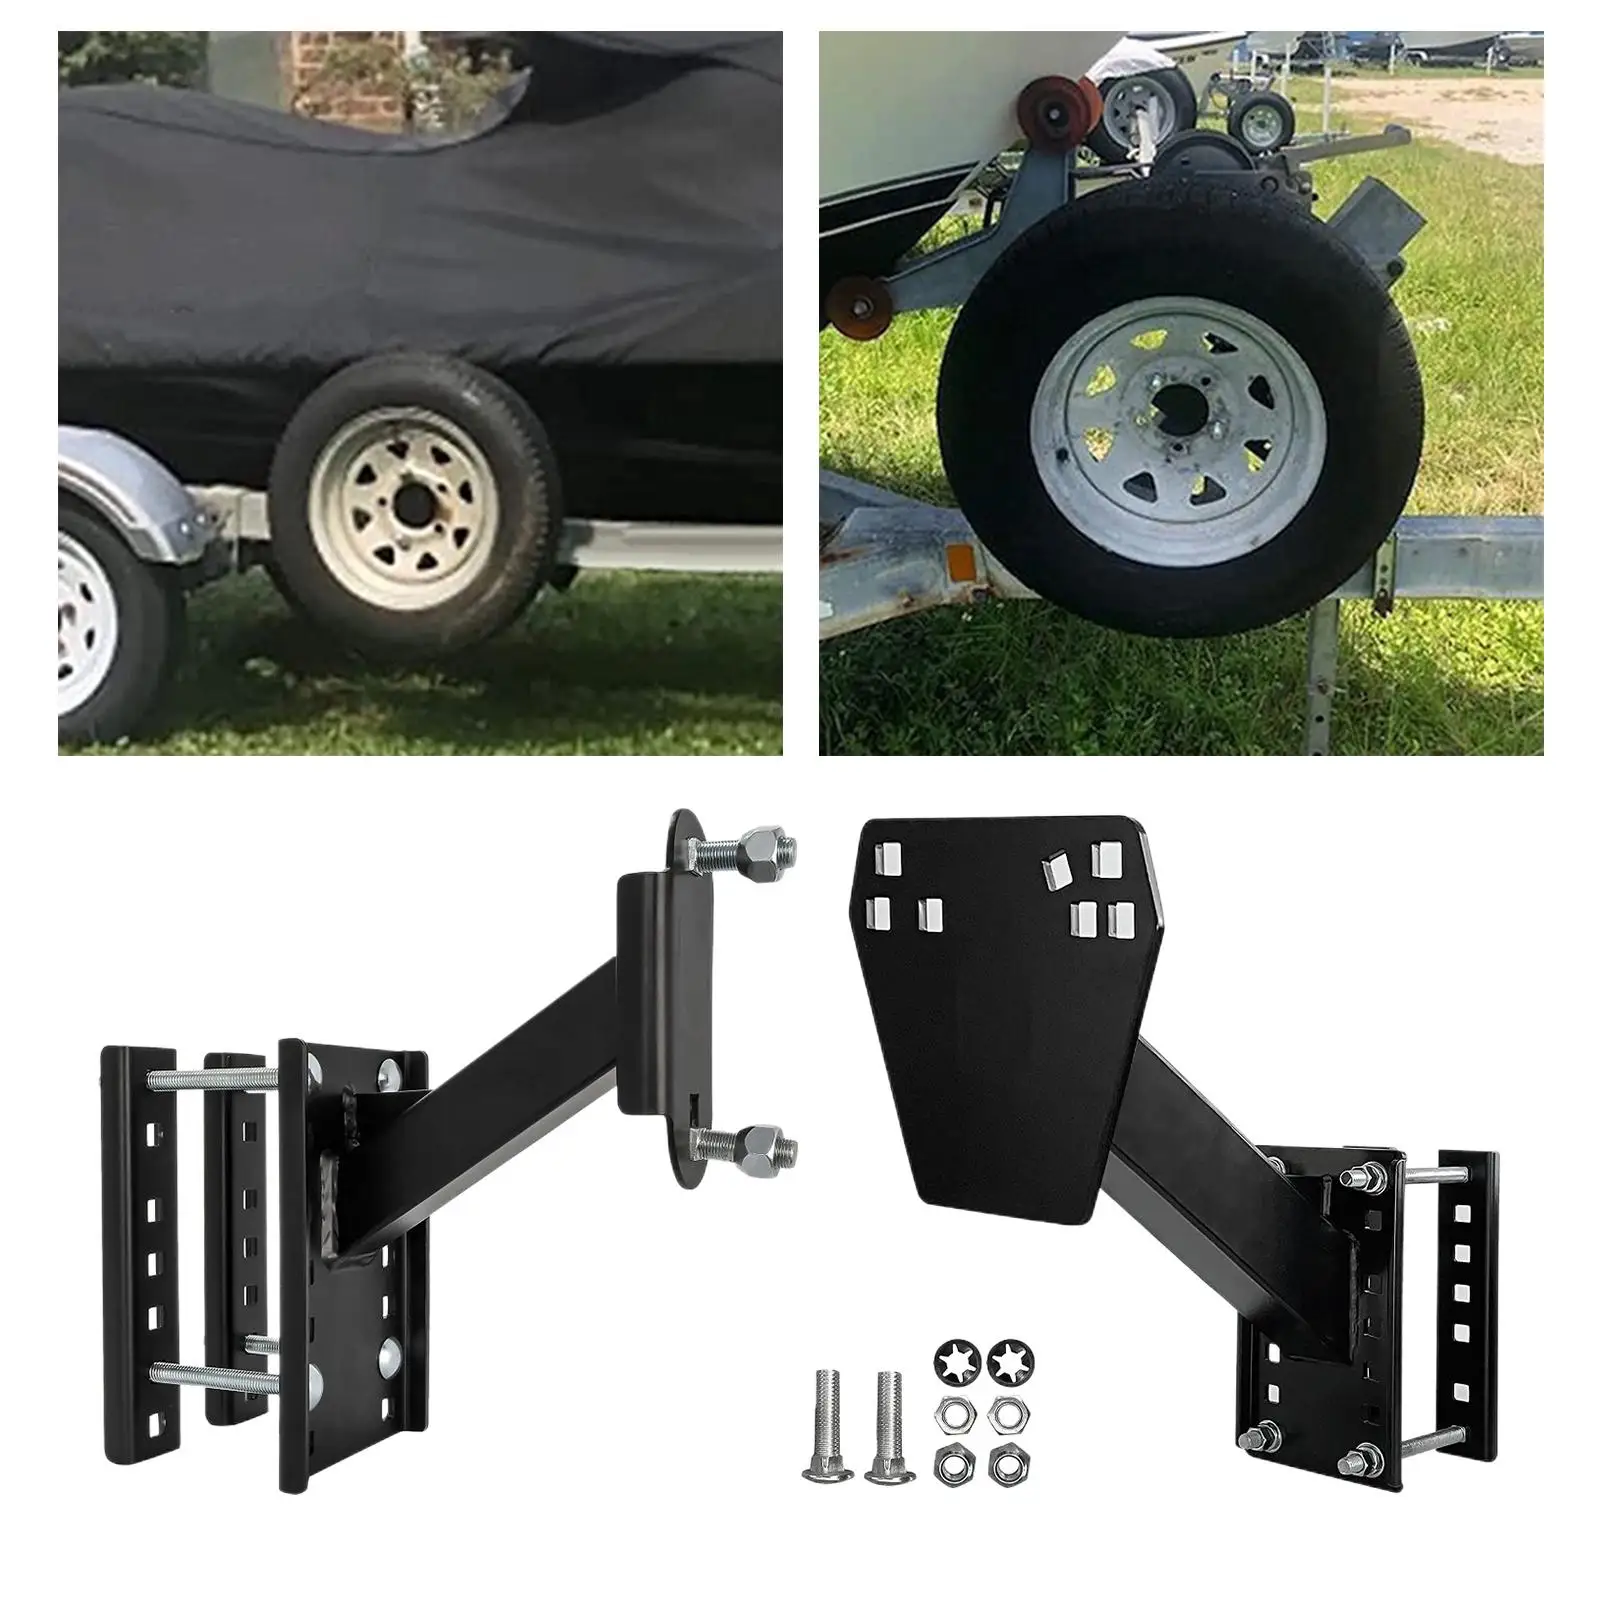 Trailer Spare Tire Carrier Wheel Holder, Bolt On W/ Screws Bracket Heavy Duty Mount Universal Support Black Fit for Trailers RV